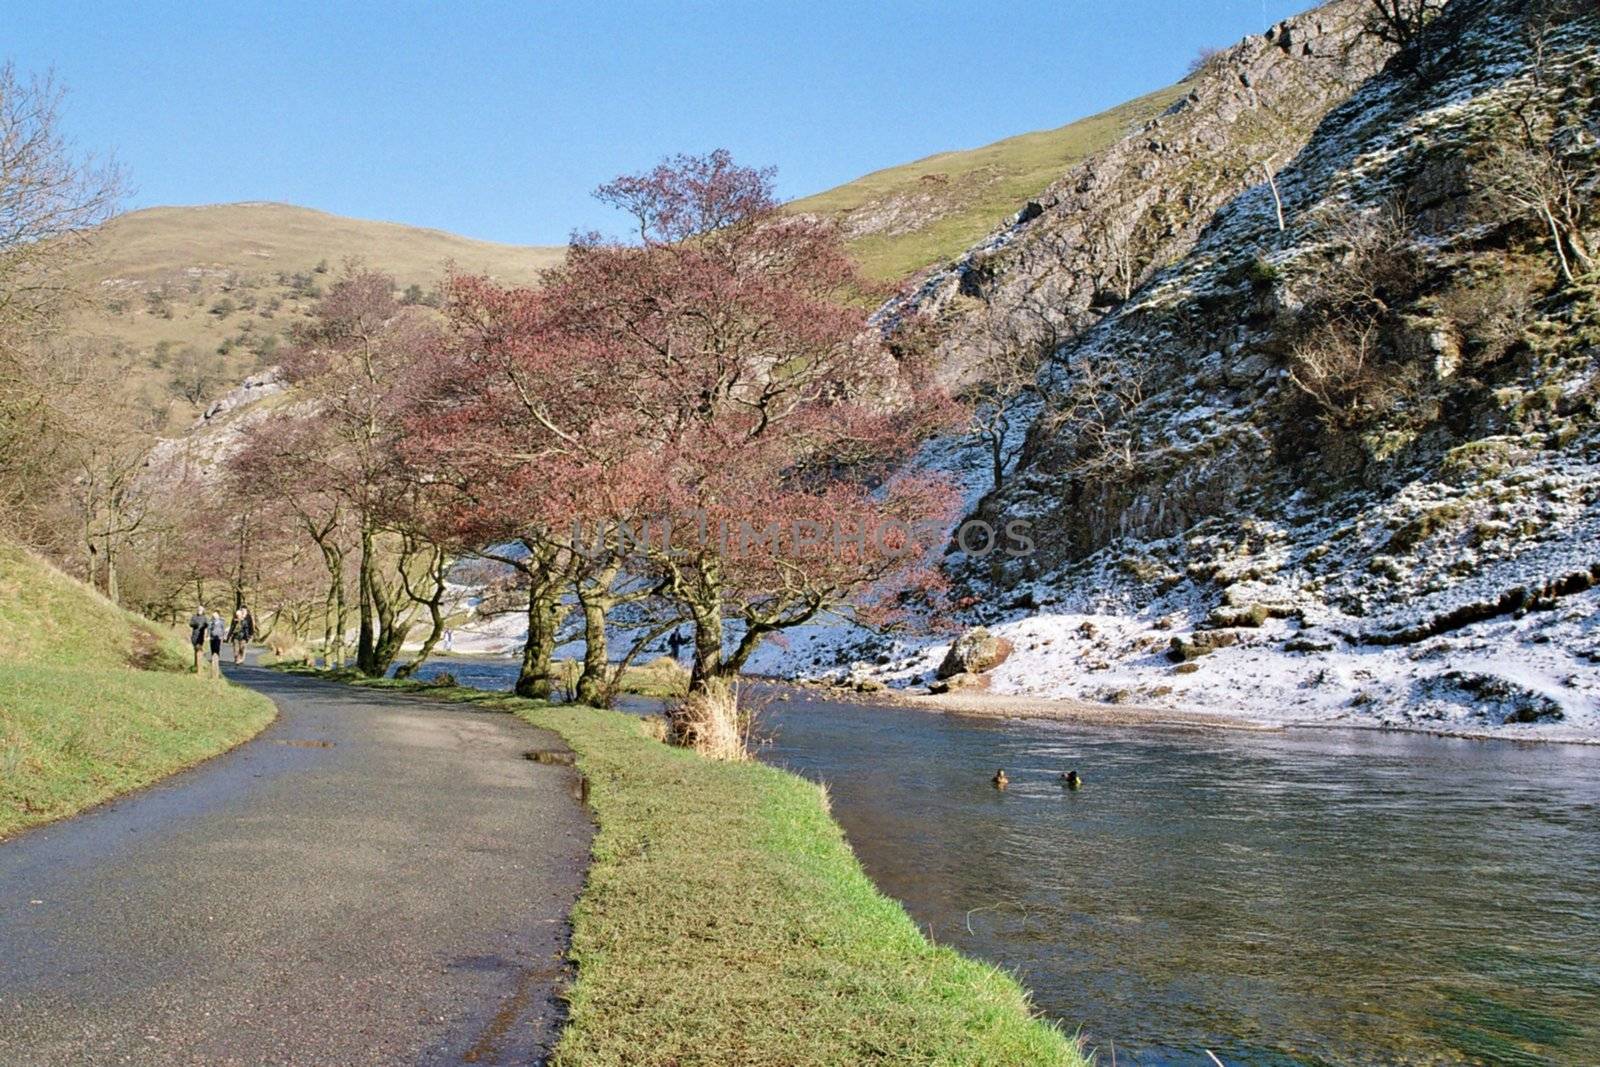 entrance of the dovedale, england